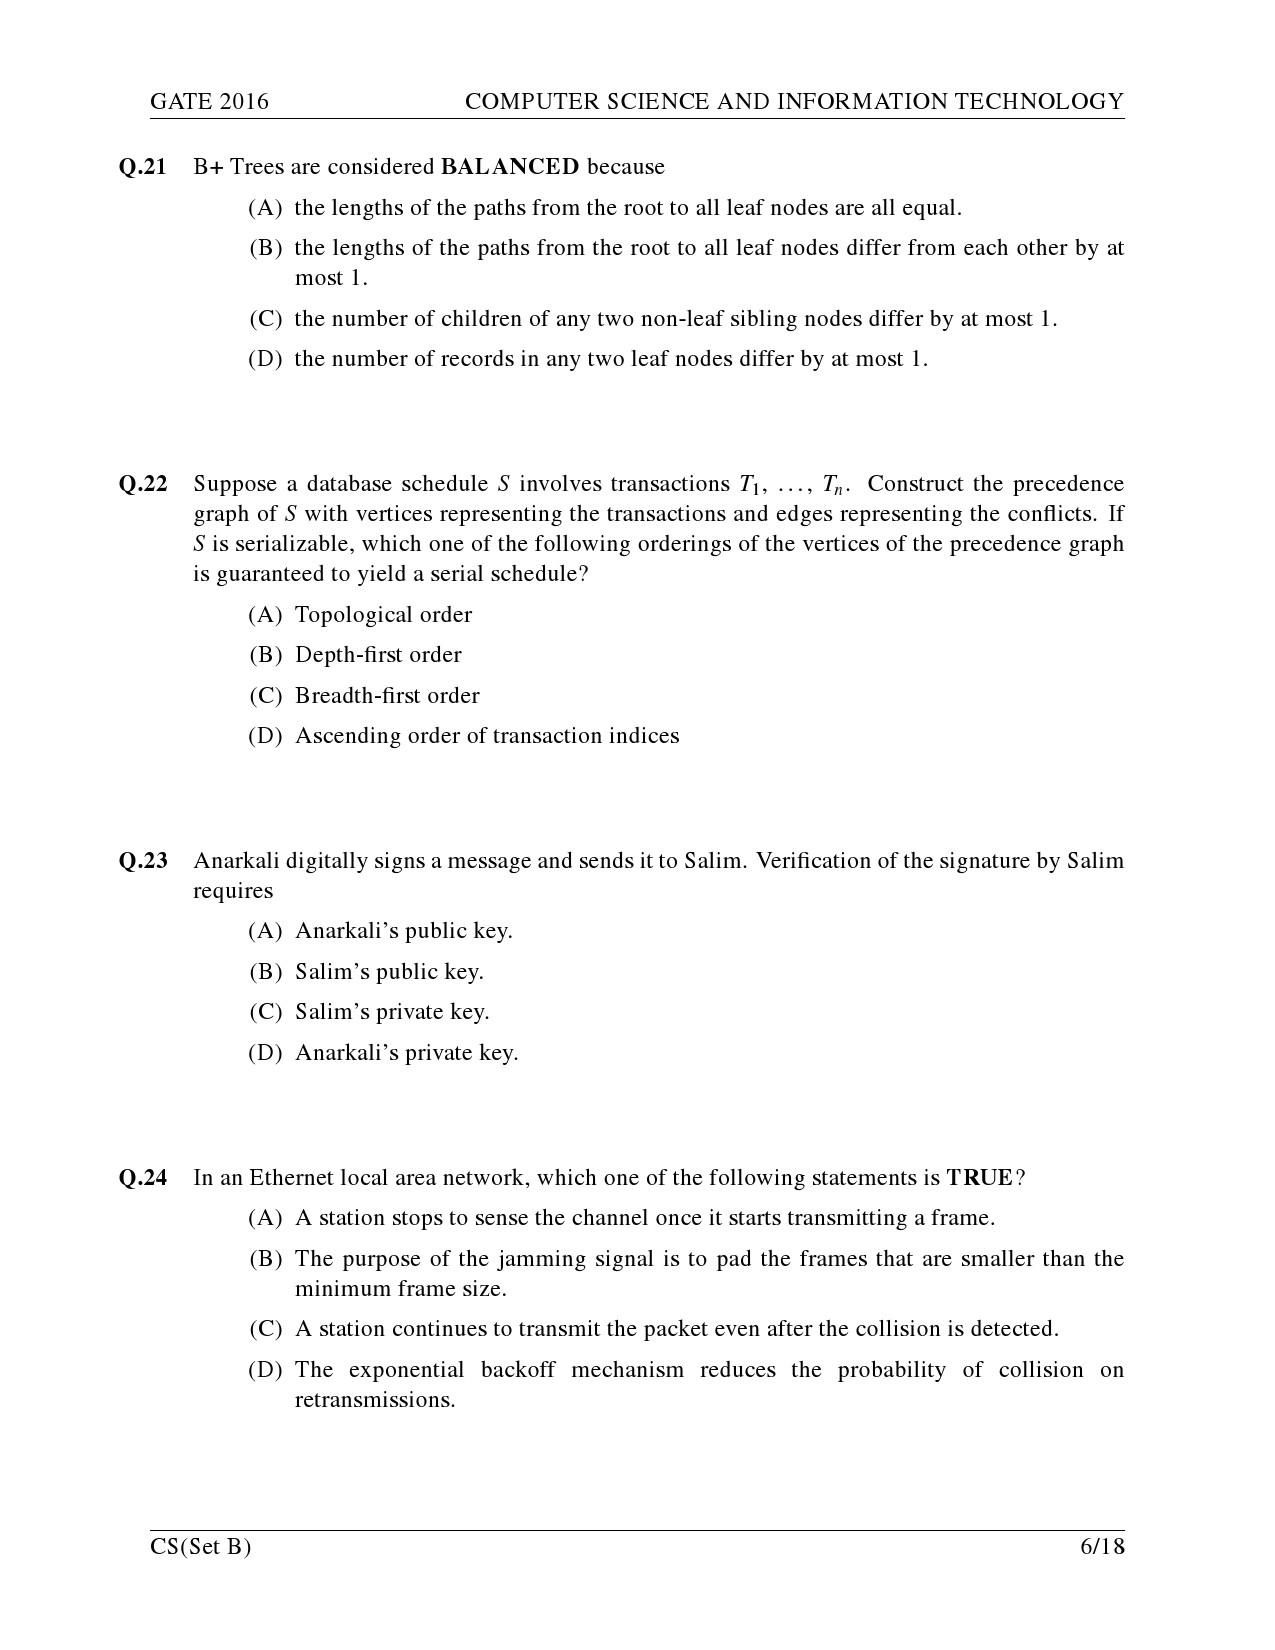 GATE Exam Question Paper 2016 Computer Science and Information Technology Set B 9